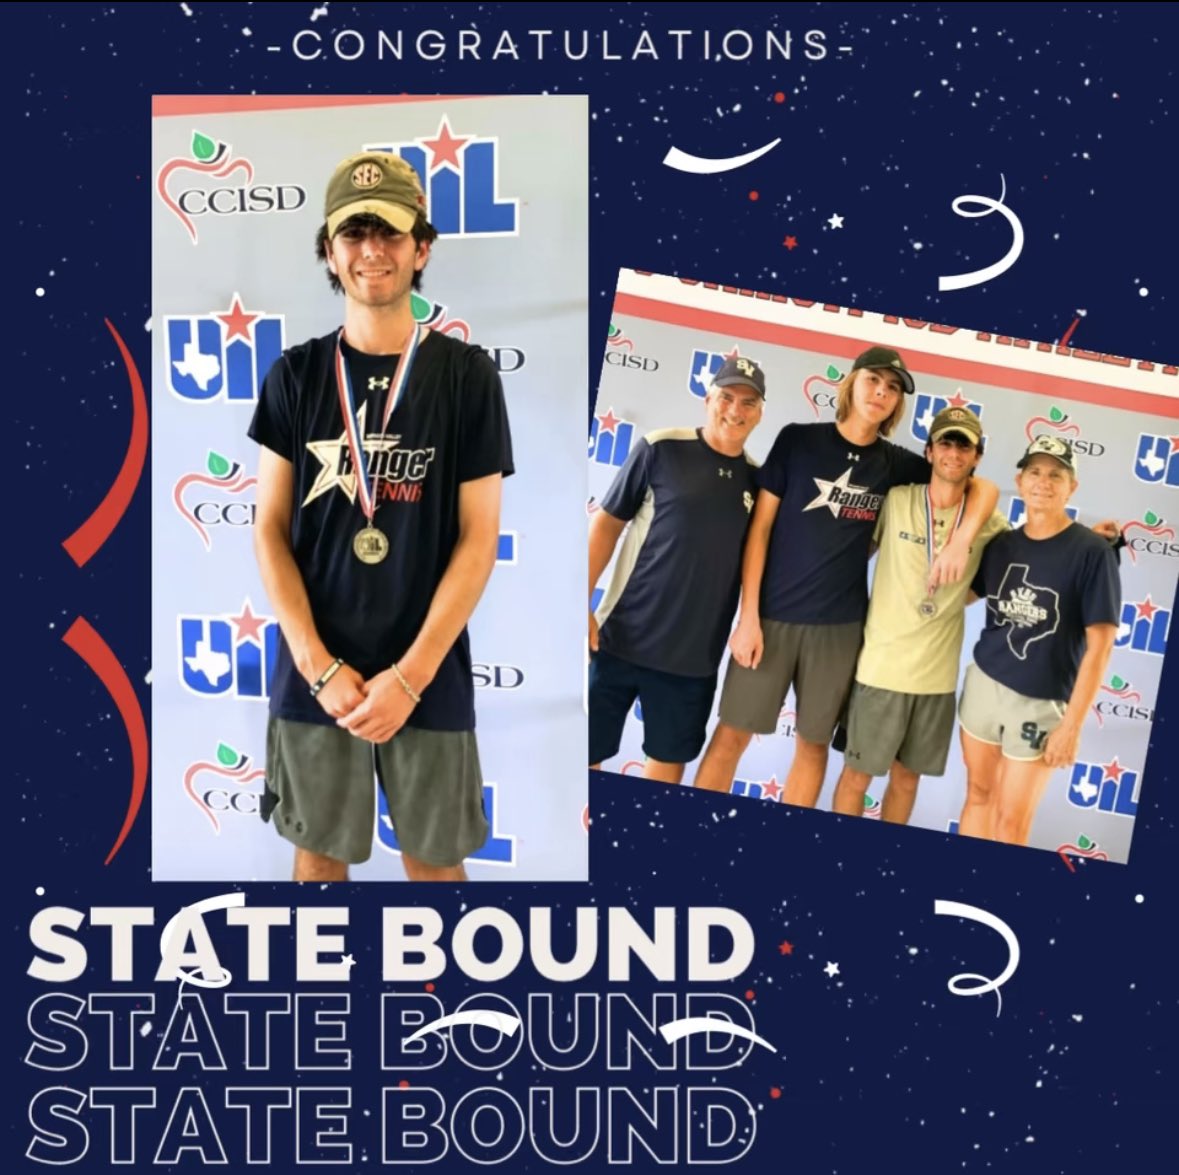 Busy weekend for these two Rangers! Both Jude B. and Barrett S. faced very strong opponents, fought hard during each match, and played some great tennis! Big Congrats to Jude B., he is headed to the state tournament later this month! @SV_Rangers @valleyventana @DrChapmanCISD